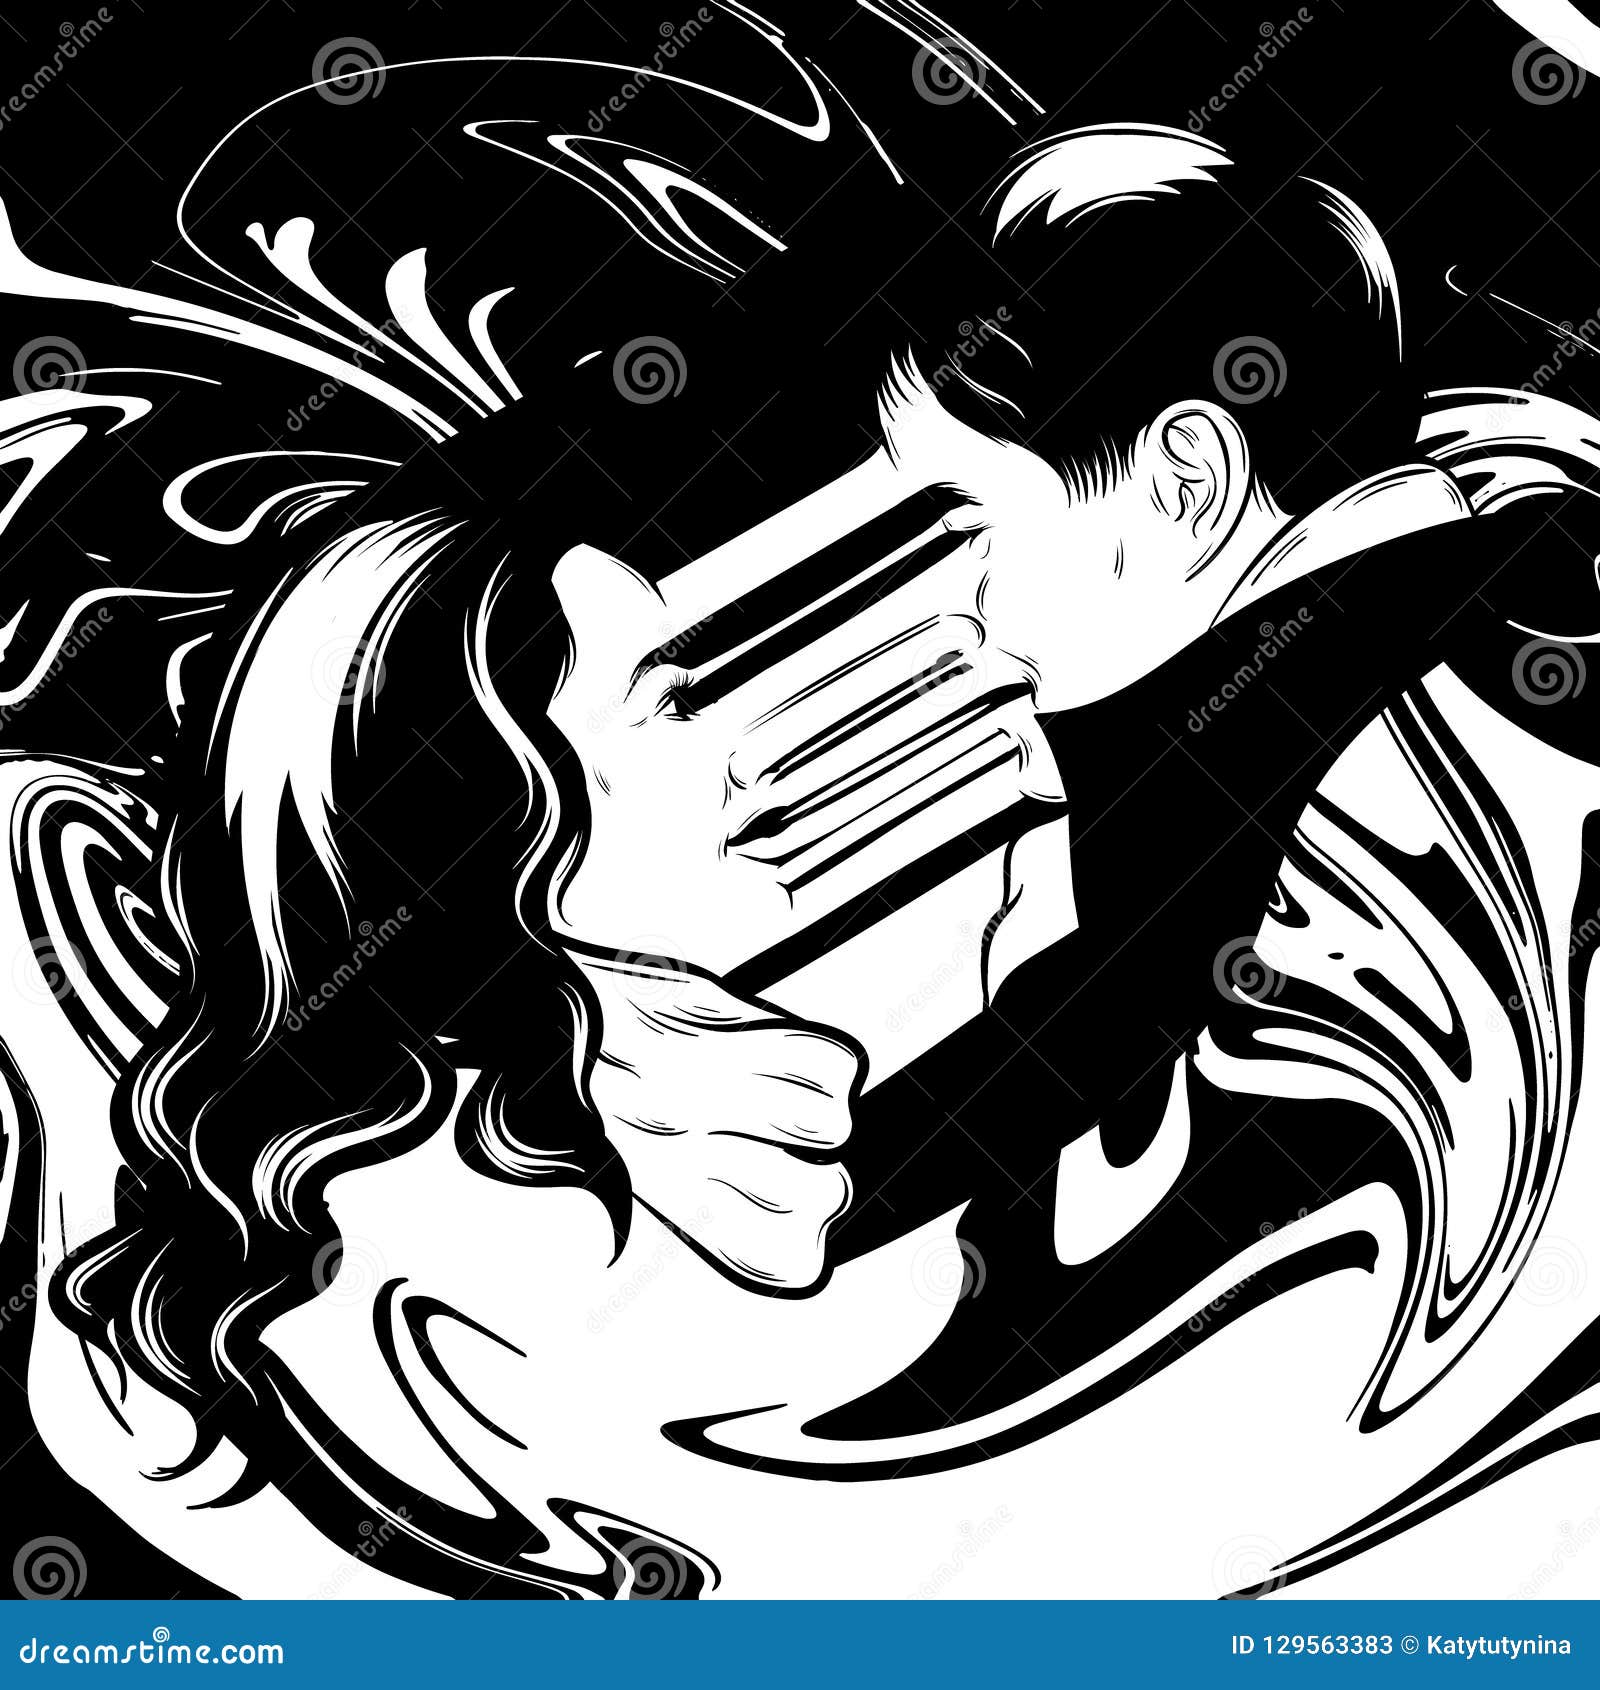 Vector Hand Drawn Surreal Illustration of Two Lovers . Stock Vector ...